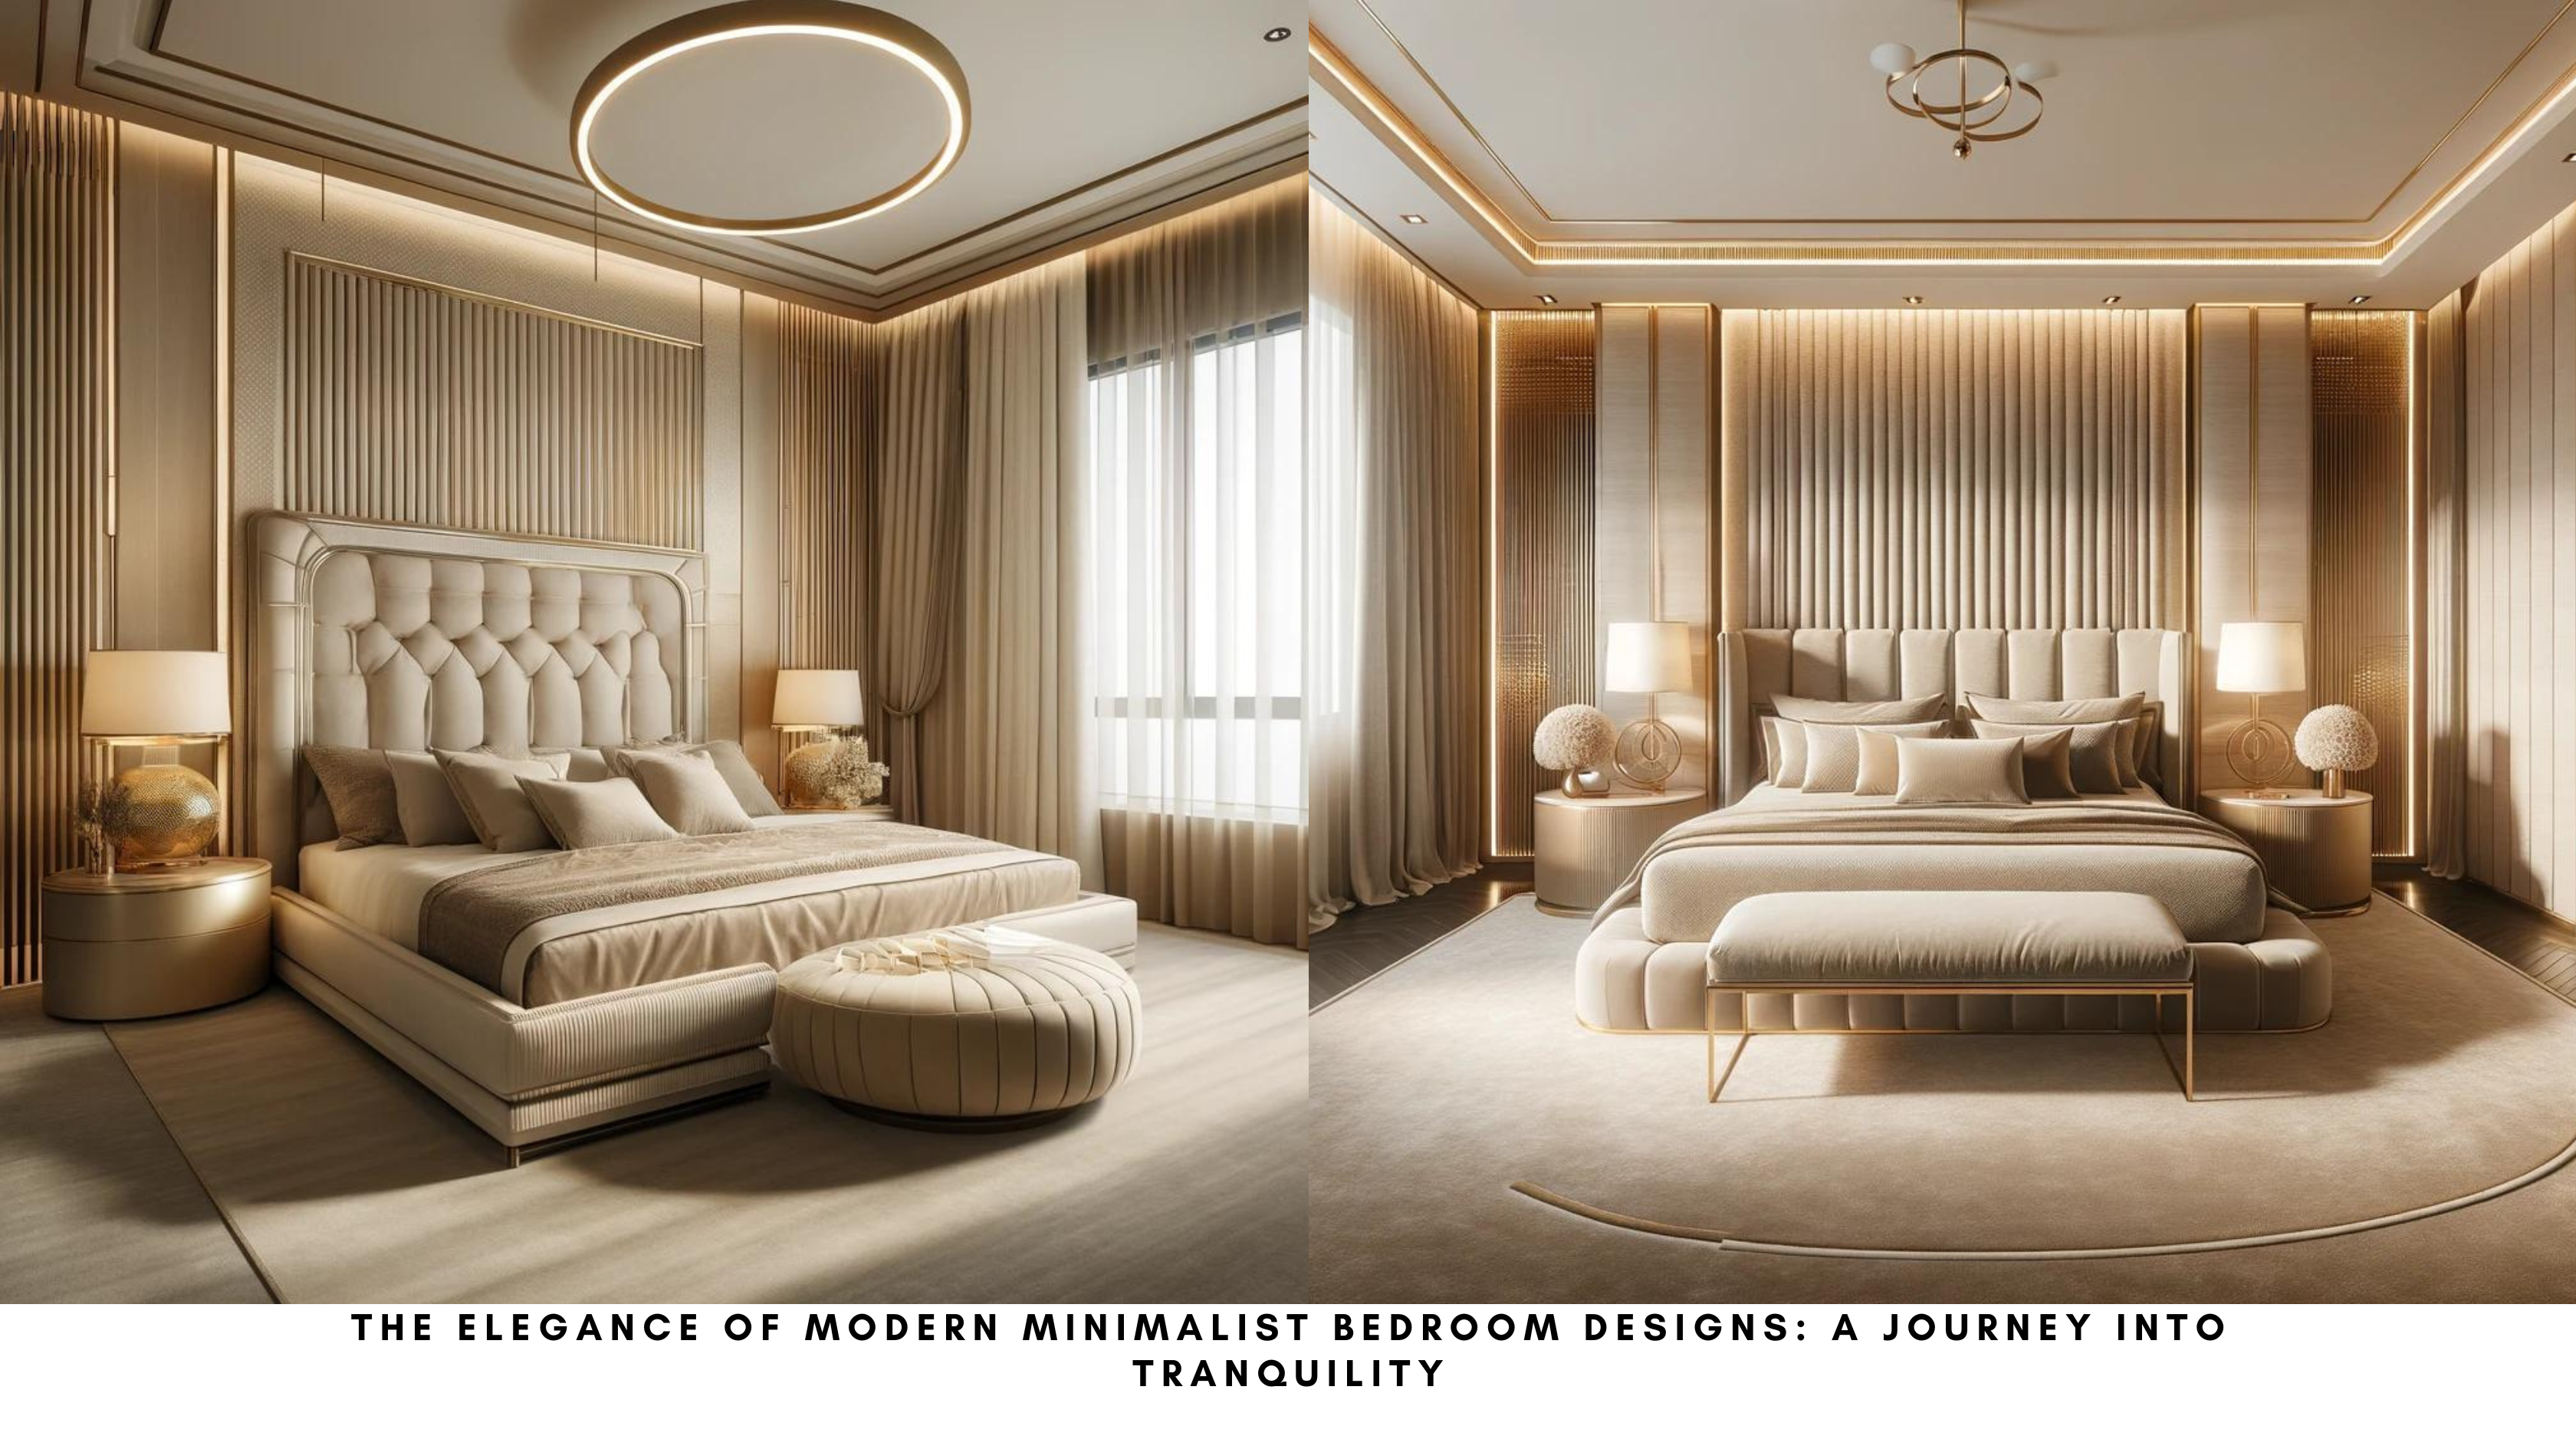 Luxurious modern minimalist bedroom with clean lines, neutral tones, and soft textures, featuring large windows and elegant lighting fixtures.